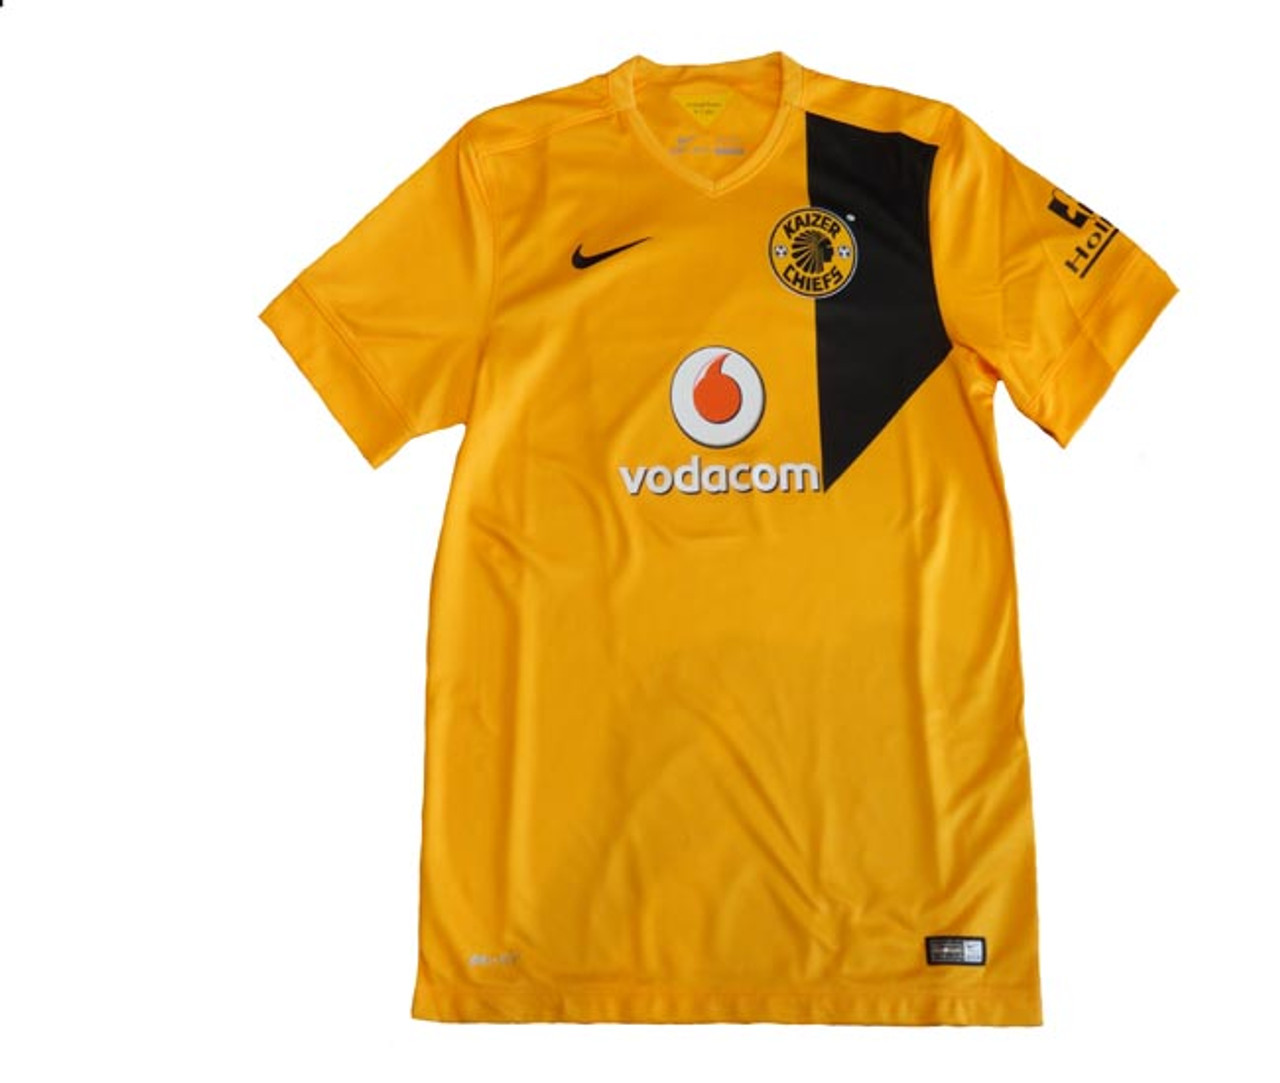 jersey number 15 at kaizer chiefs